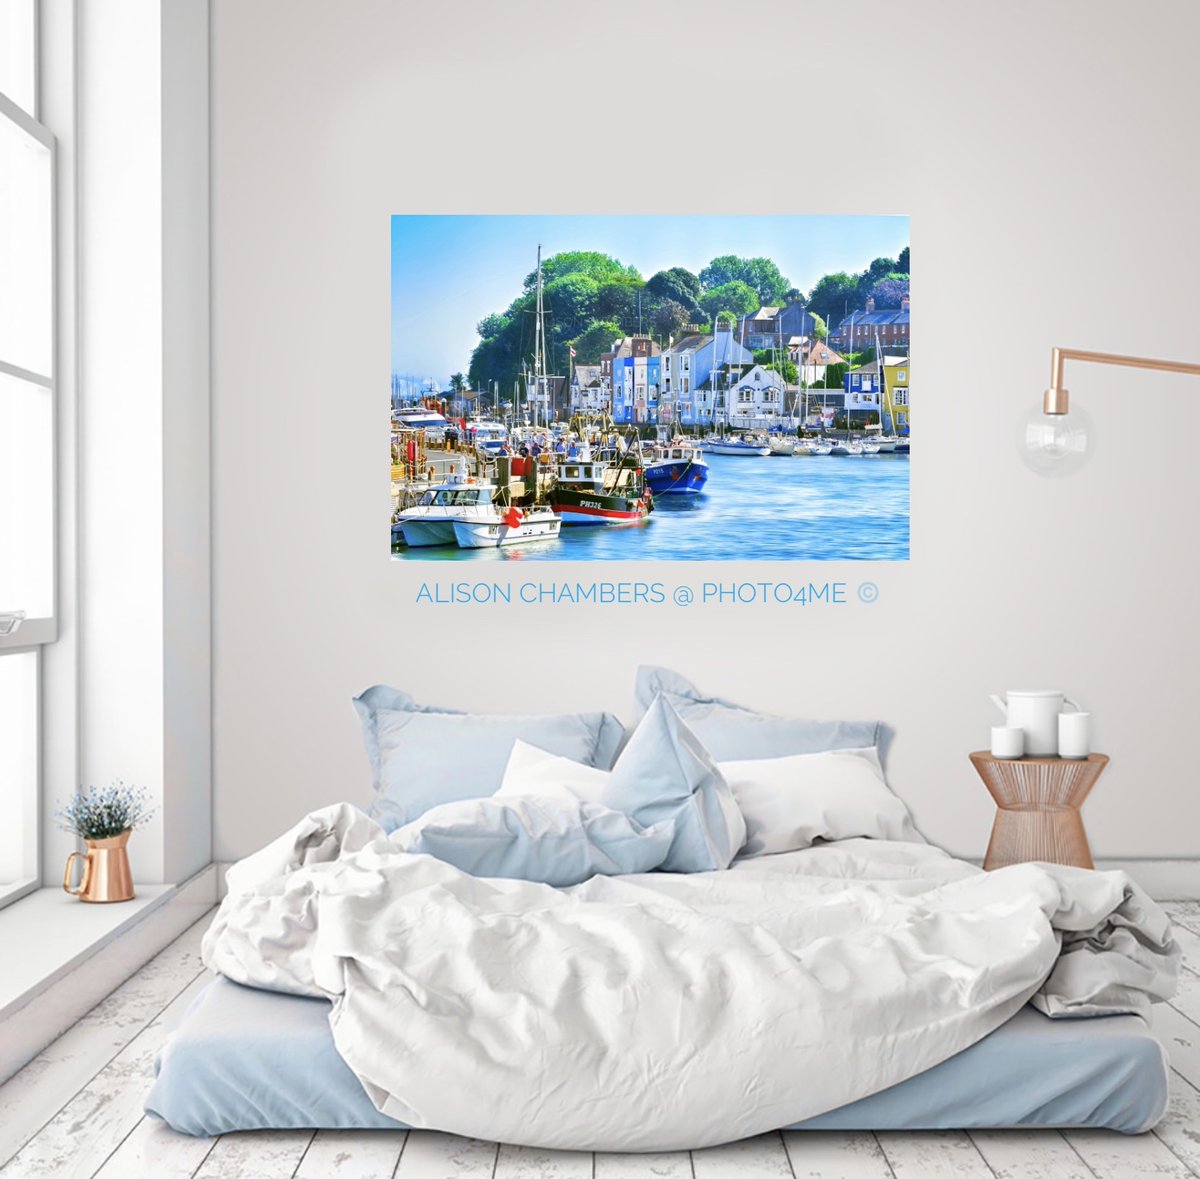 Weymouth ©️. Available from; shop.Photo4Me.com/1283245 & alisonchambers2.redbubble.com & 2-alison-chambers.pixels.com #weymouth #weymouthandportland #weymouthdorset #weymouthbeach #weymouthharbour #dorset #dorsetcoast #dorsetphotography